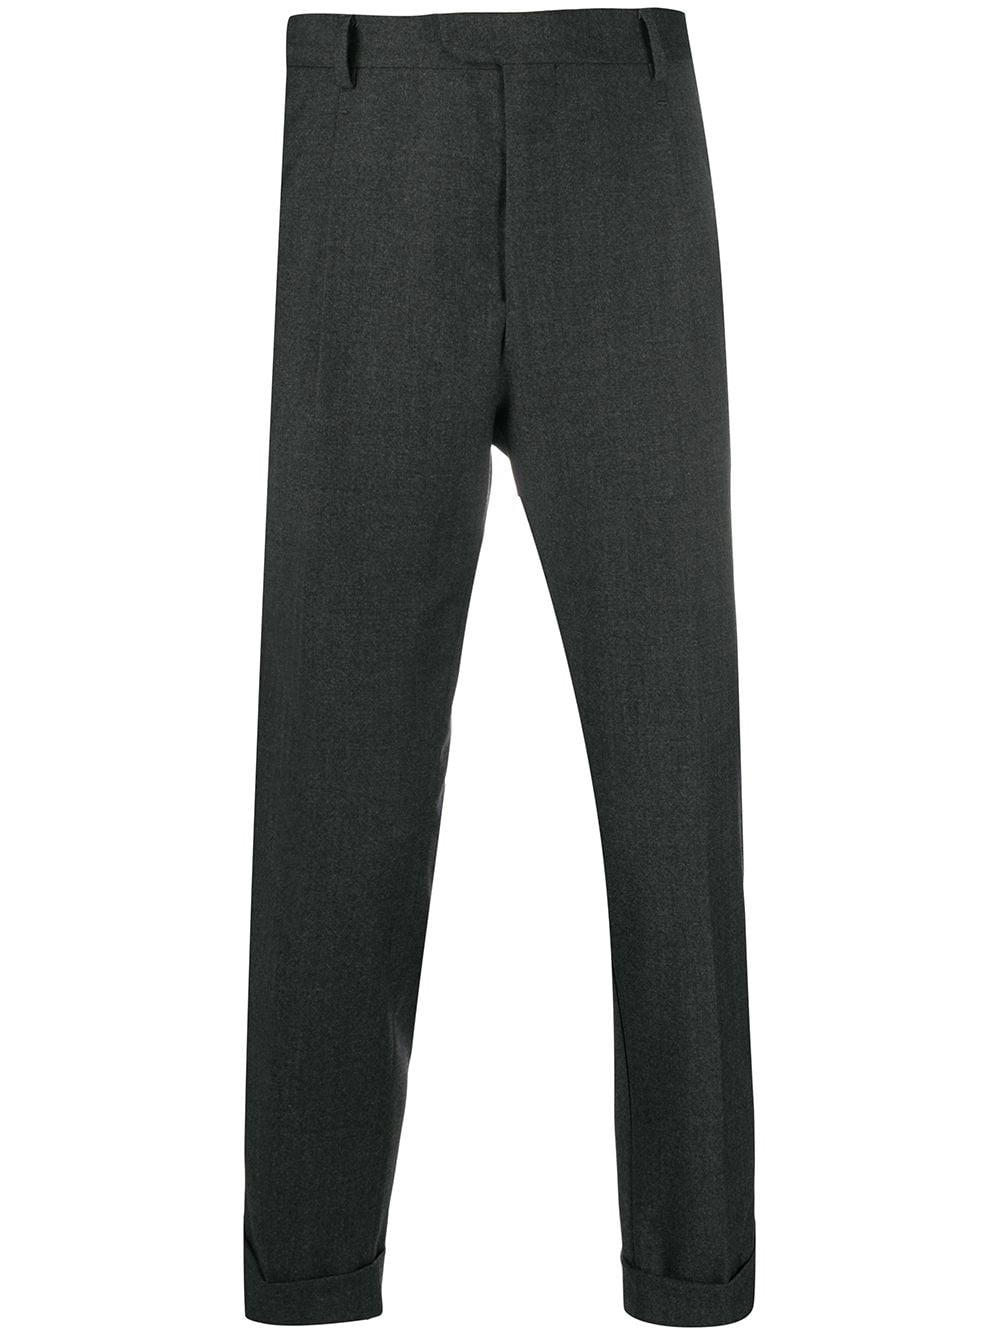 Z Zegna Tailored Wool-mix Trousers in Grey (Gray) for Men - Save 7% - Lyst